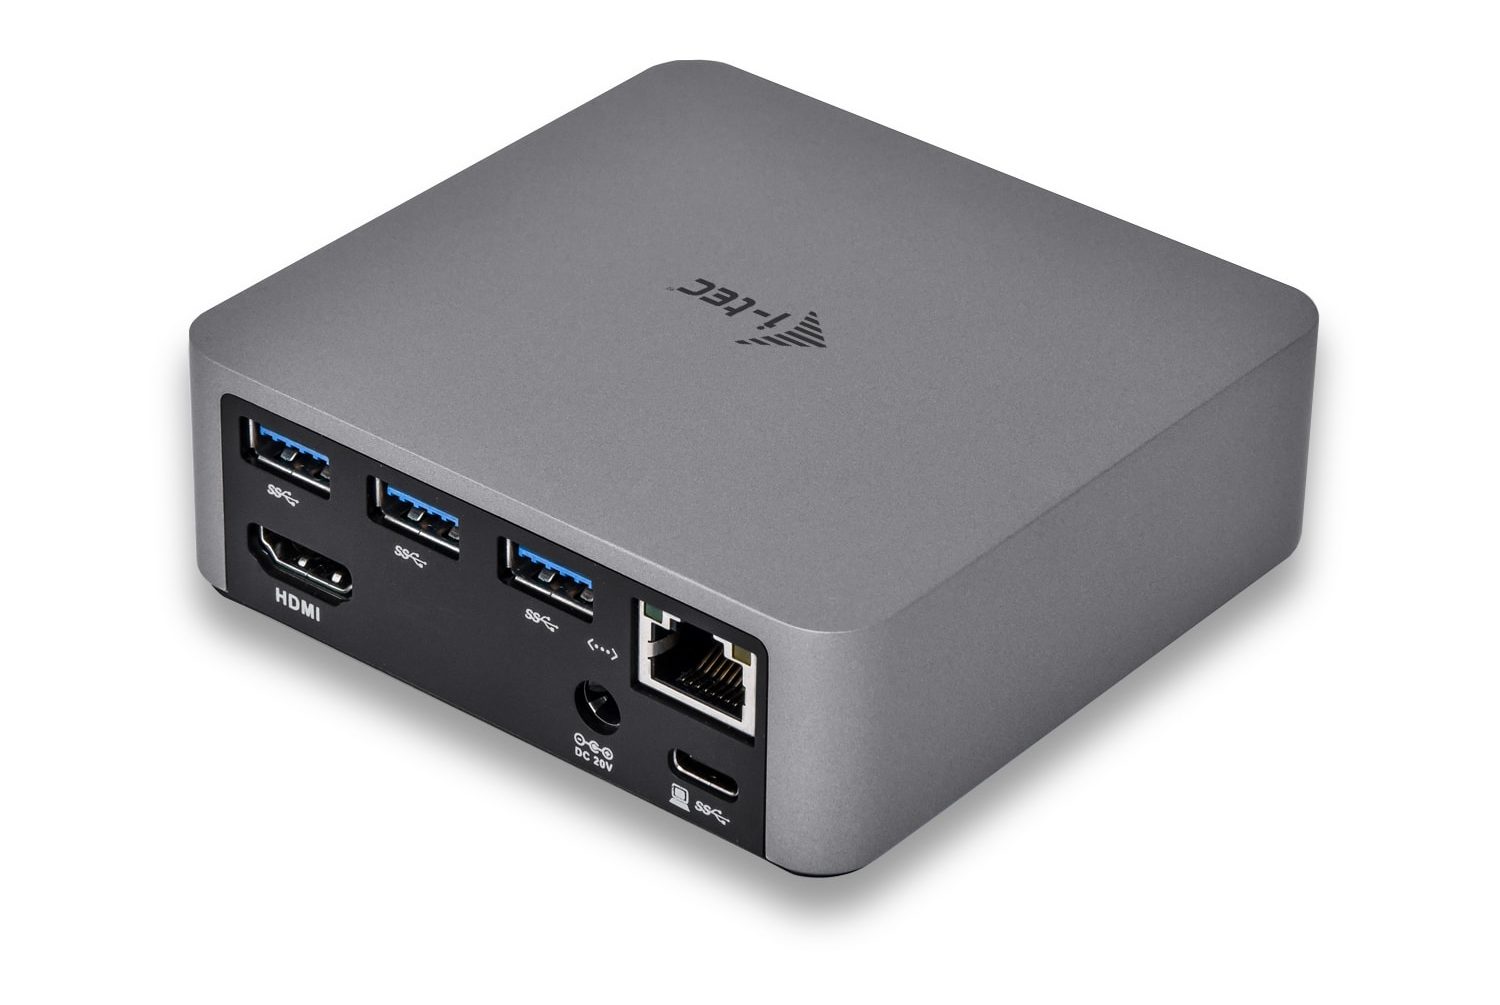 Every list of best MacBook Pro accessories must include a USB-C hub. The i-tec hub gets the job done.